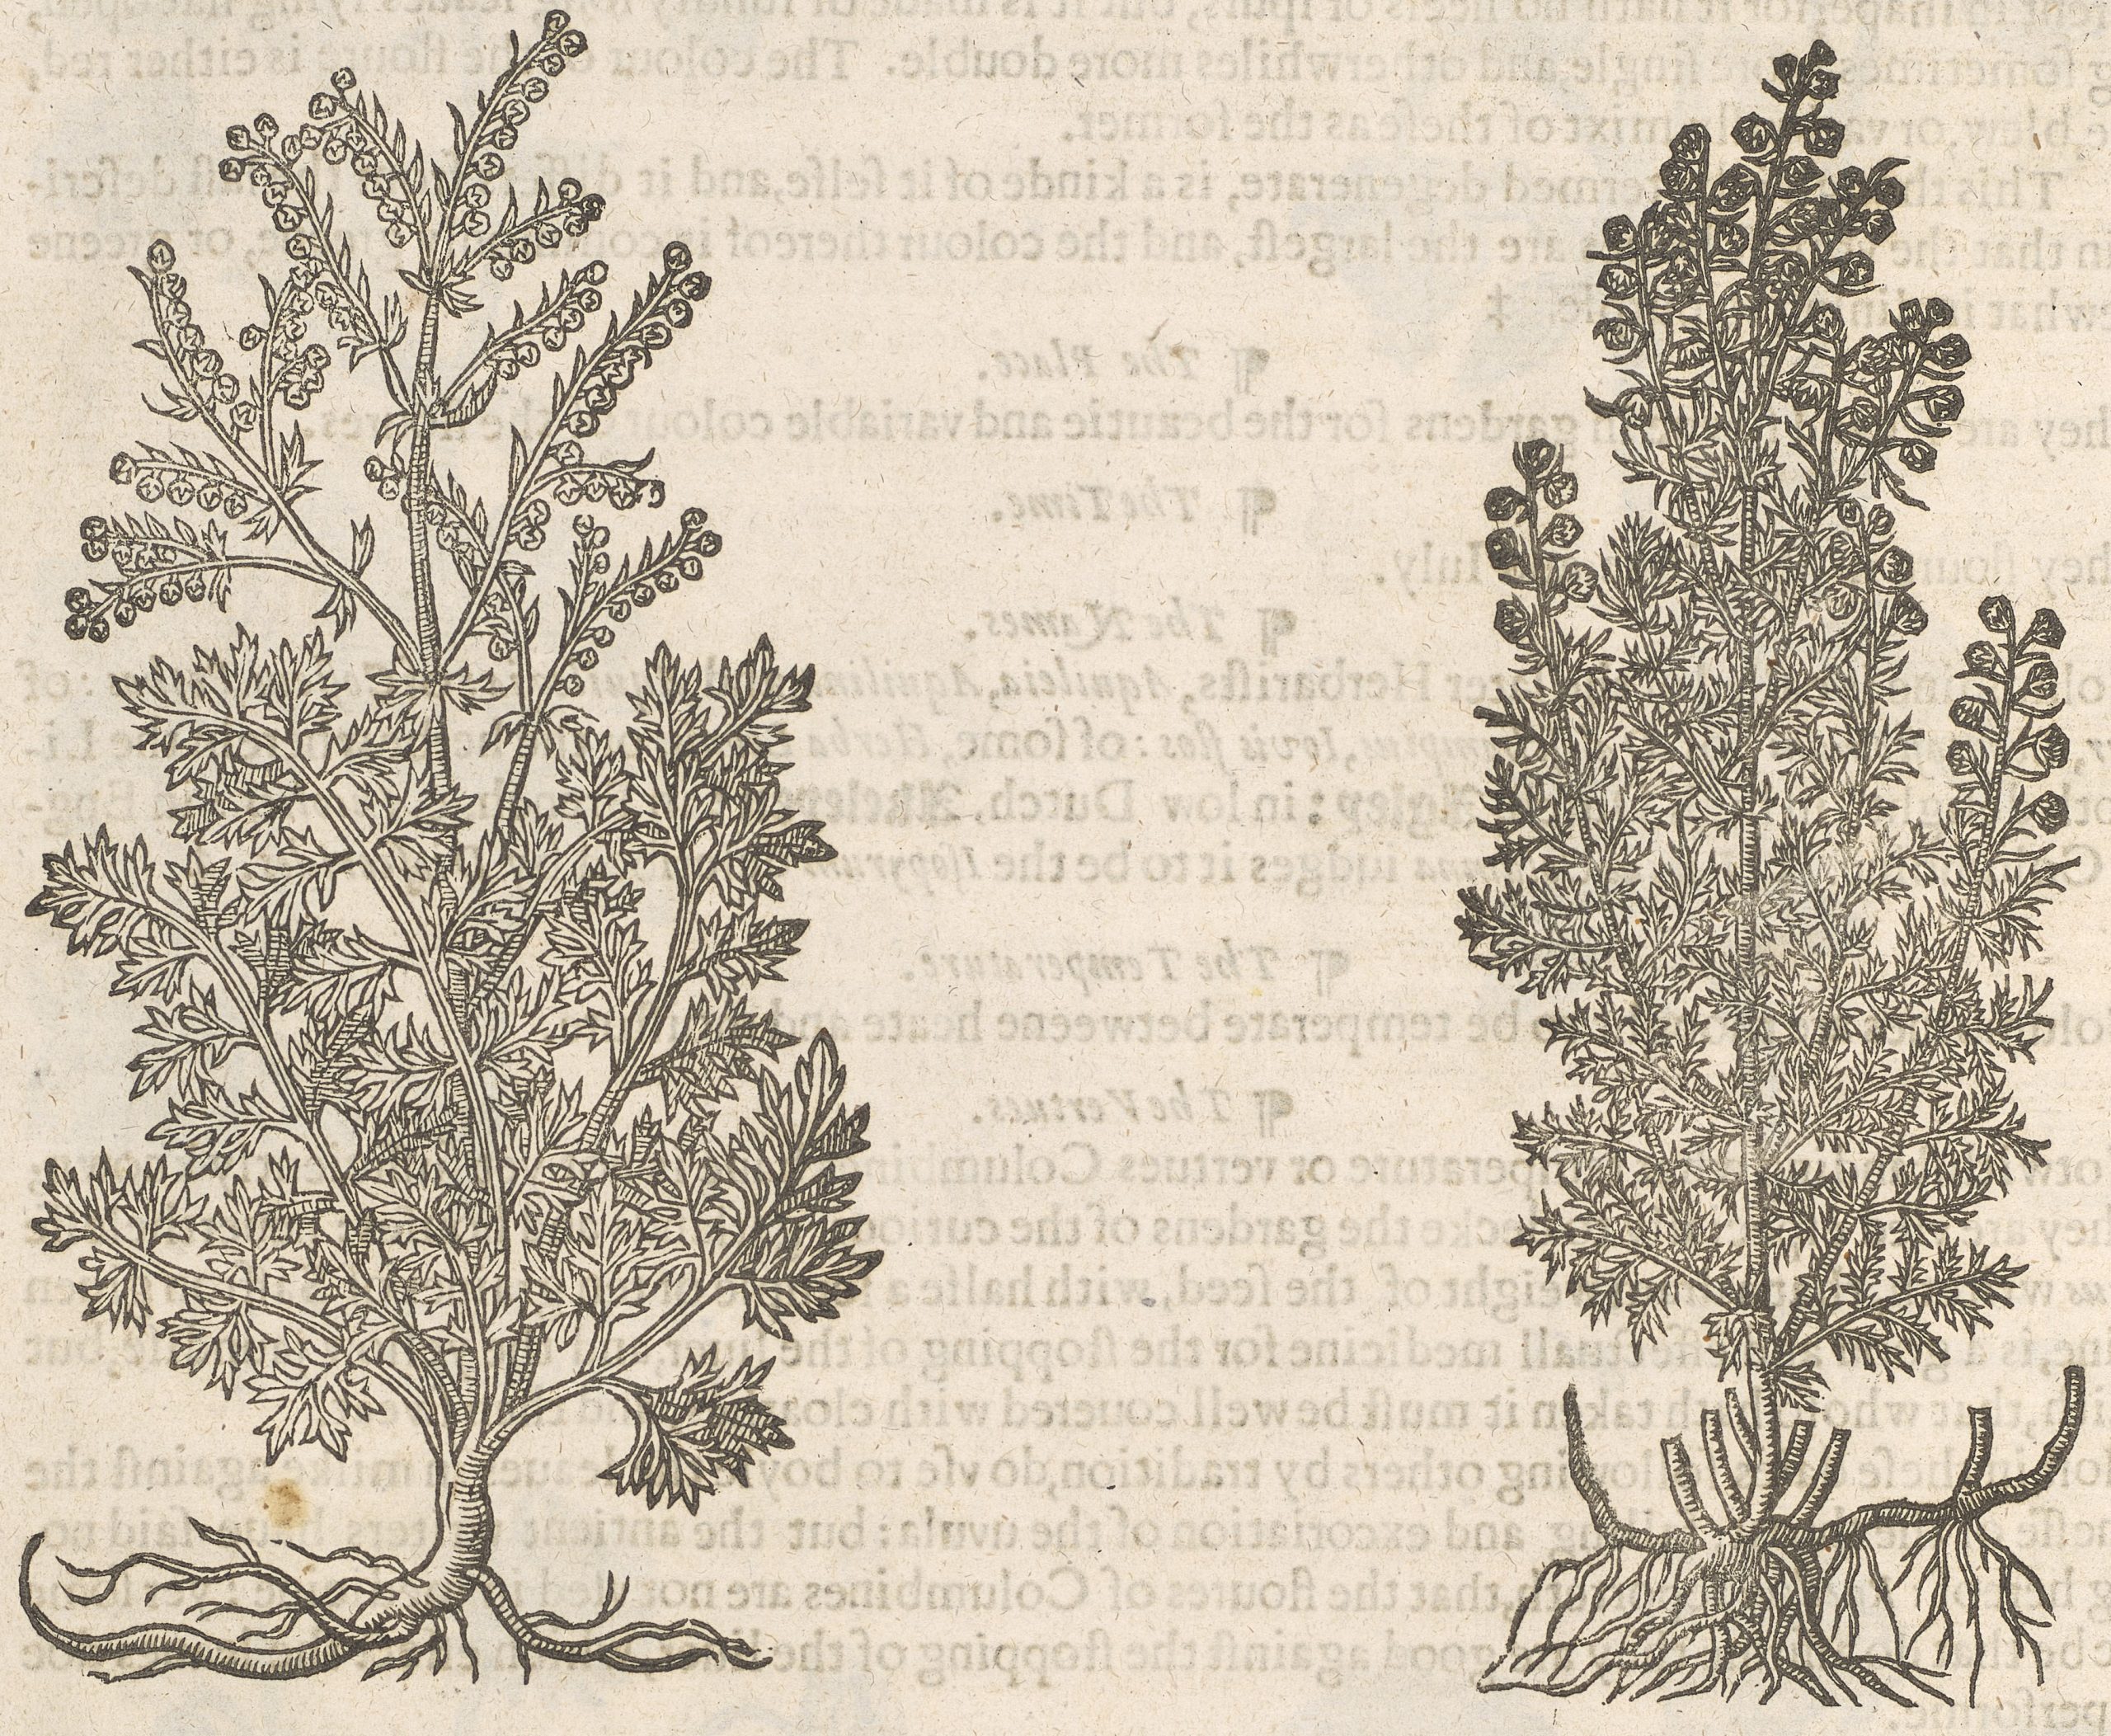 Entry for Wormwood from 'The herbal, or, Generall historie of plantes gathered by Iohn Gerarde. Very much enlarged and amended by Thomas Iohnson' (p.1096)